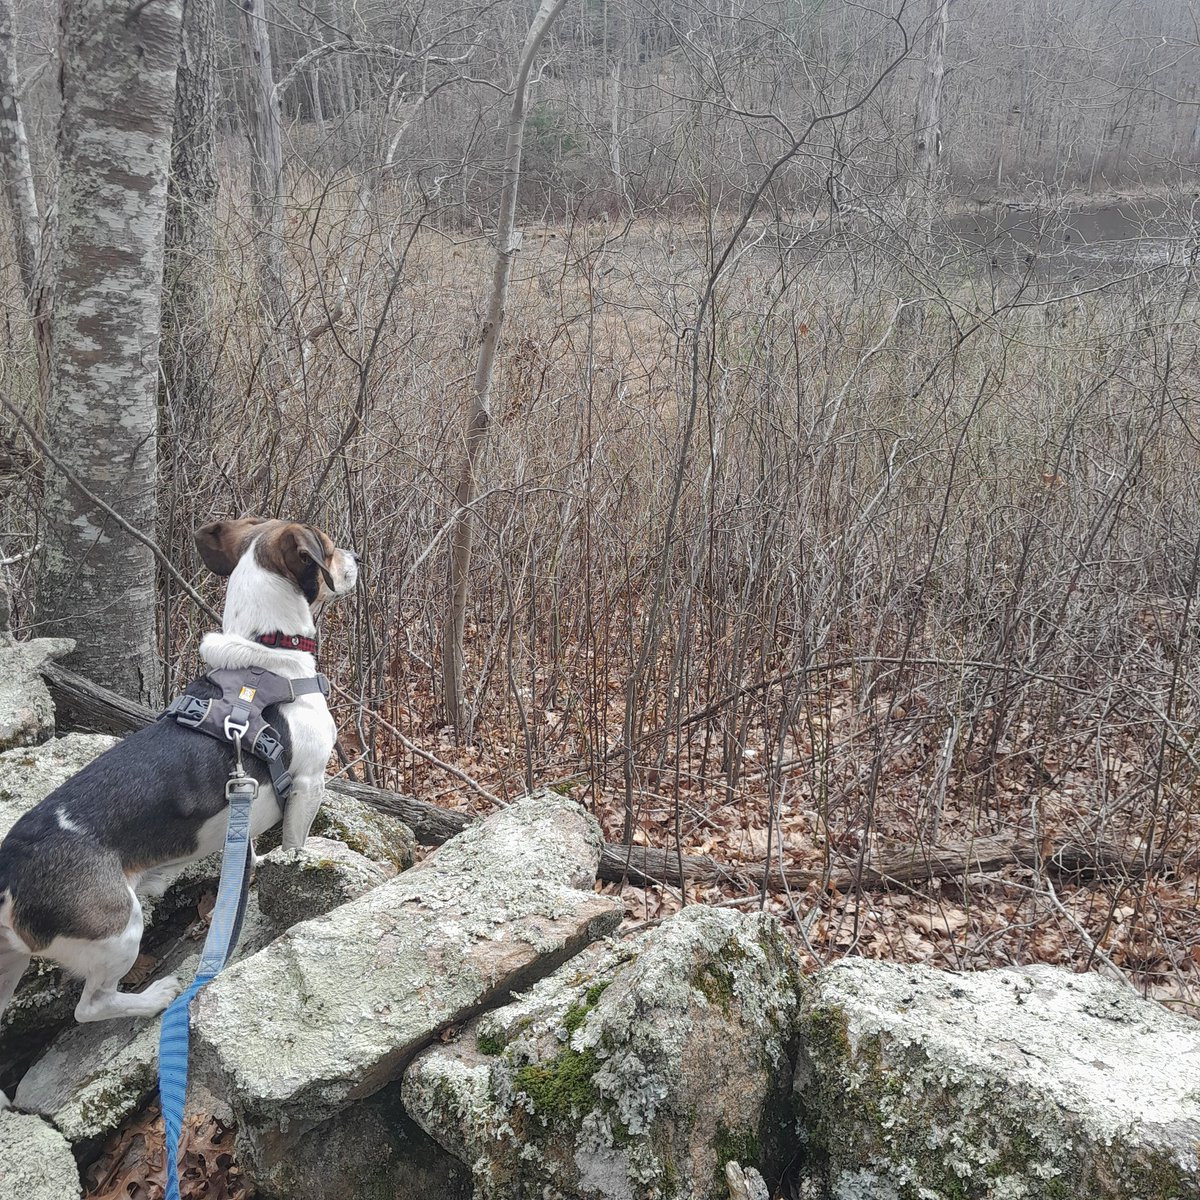 Happy Earth Day and Beagle Day! 

Take a moment today to soak in nature. 🌱

#gooutsideandplay #goexplore #hikingwithdogs #earthday #geocaching #geodog #beagle #jackrussellterrier